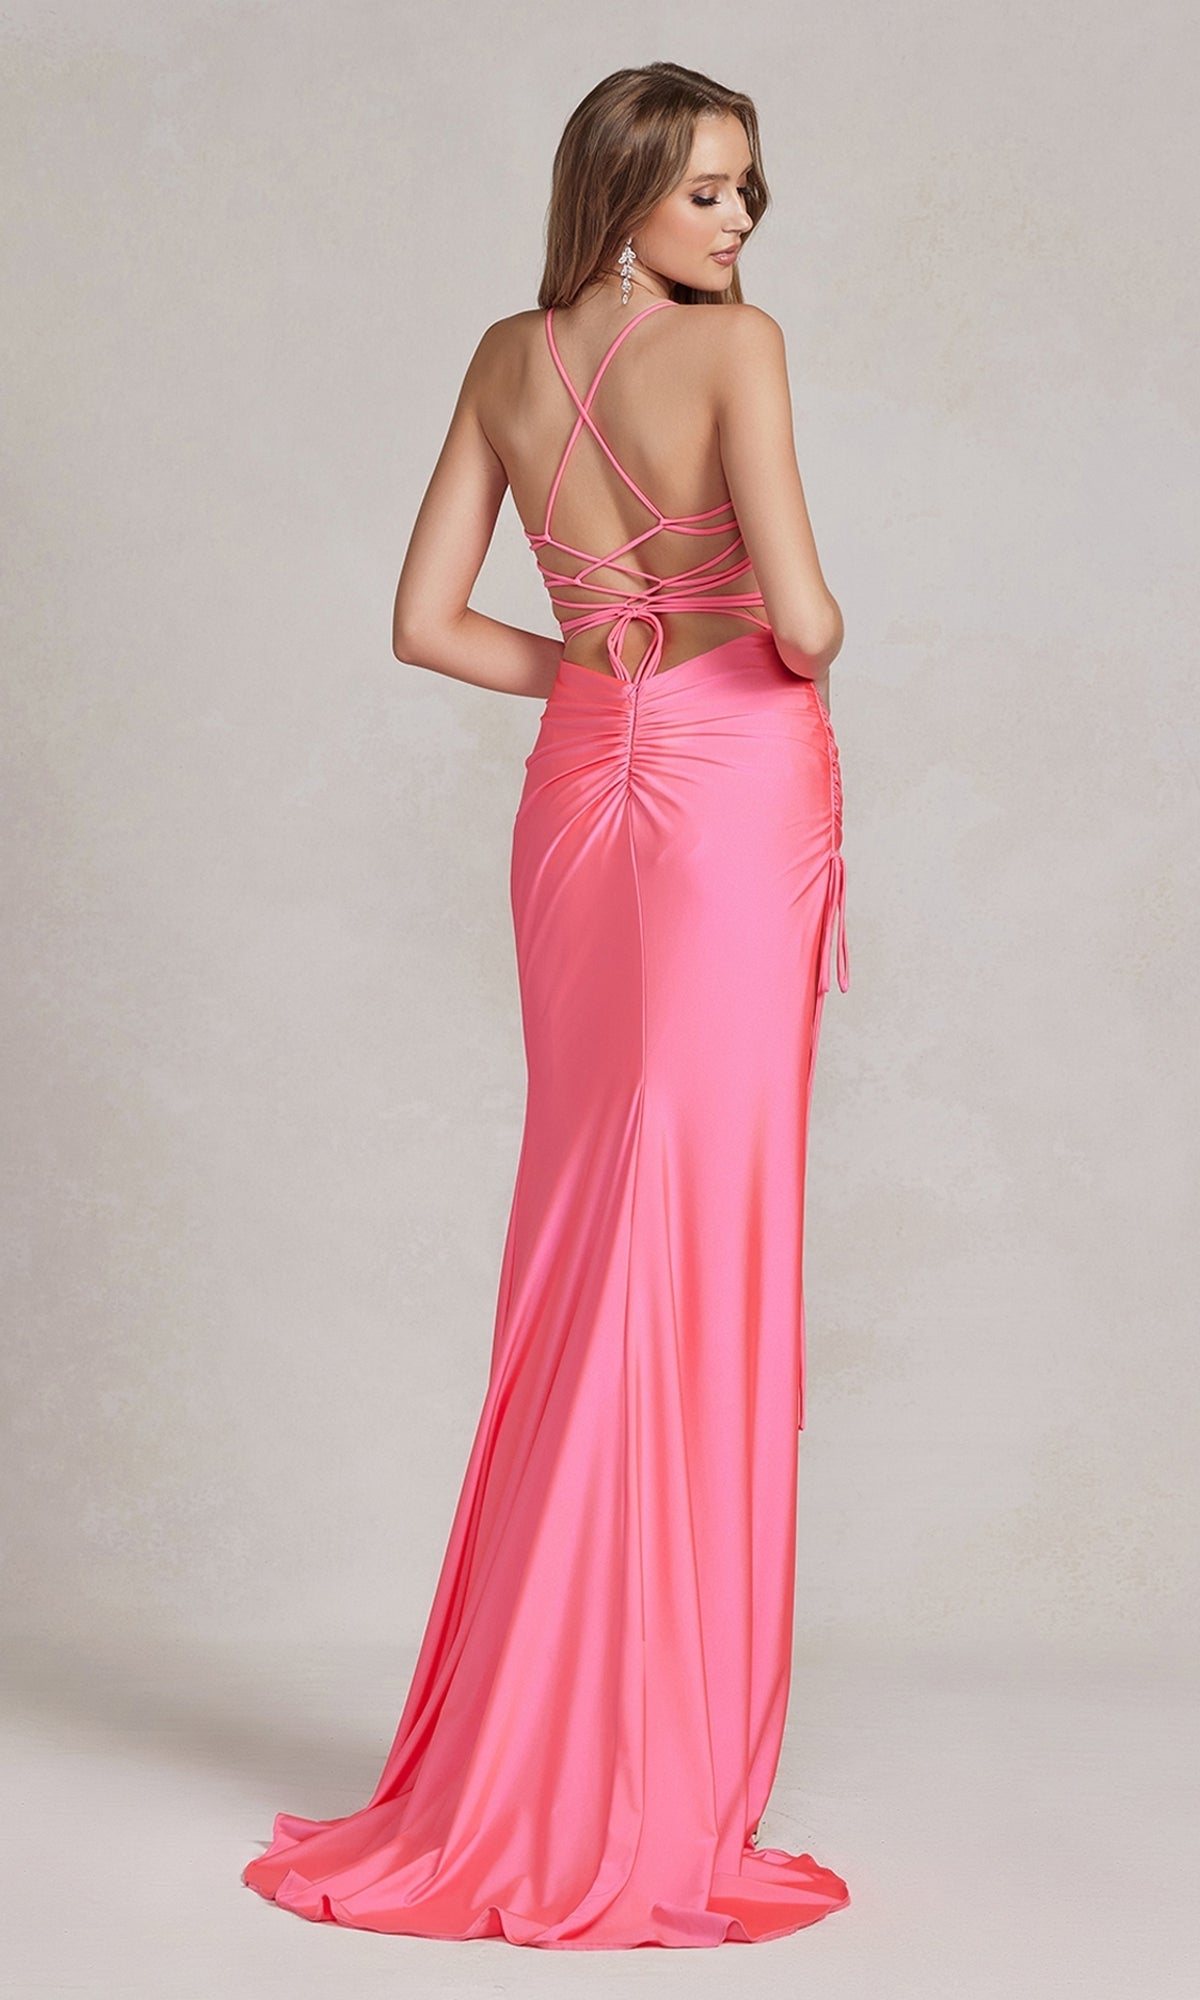  Long Prom Dress with Tied Side